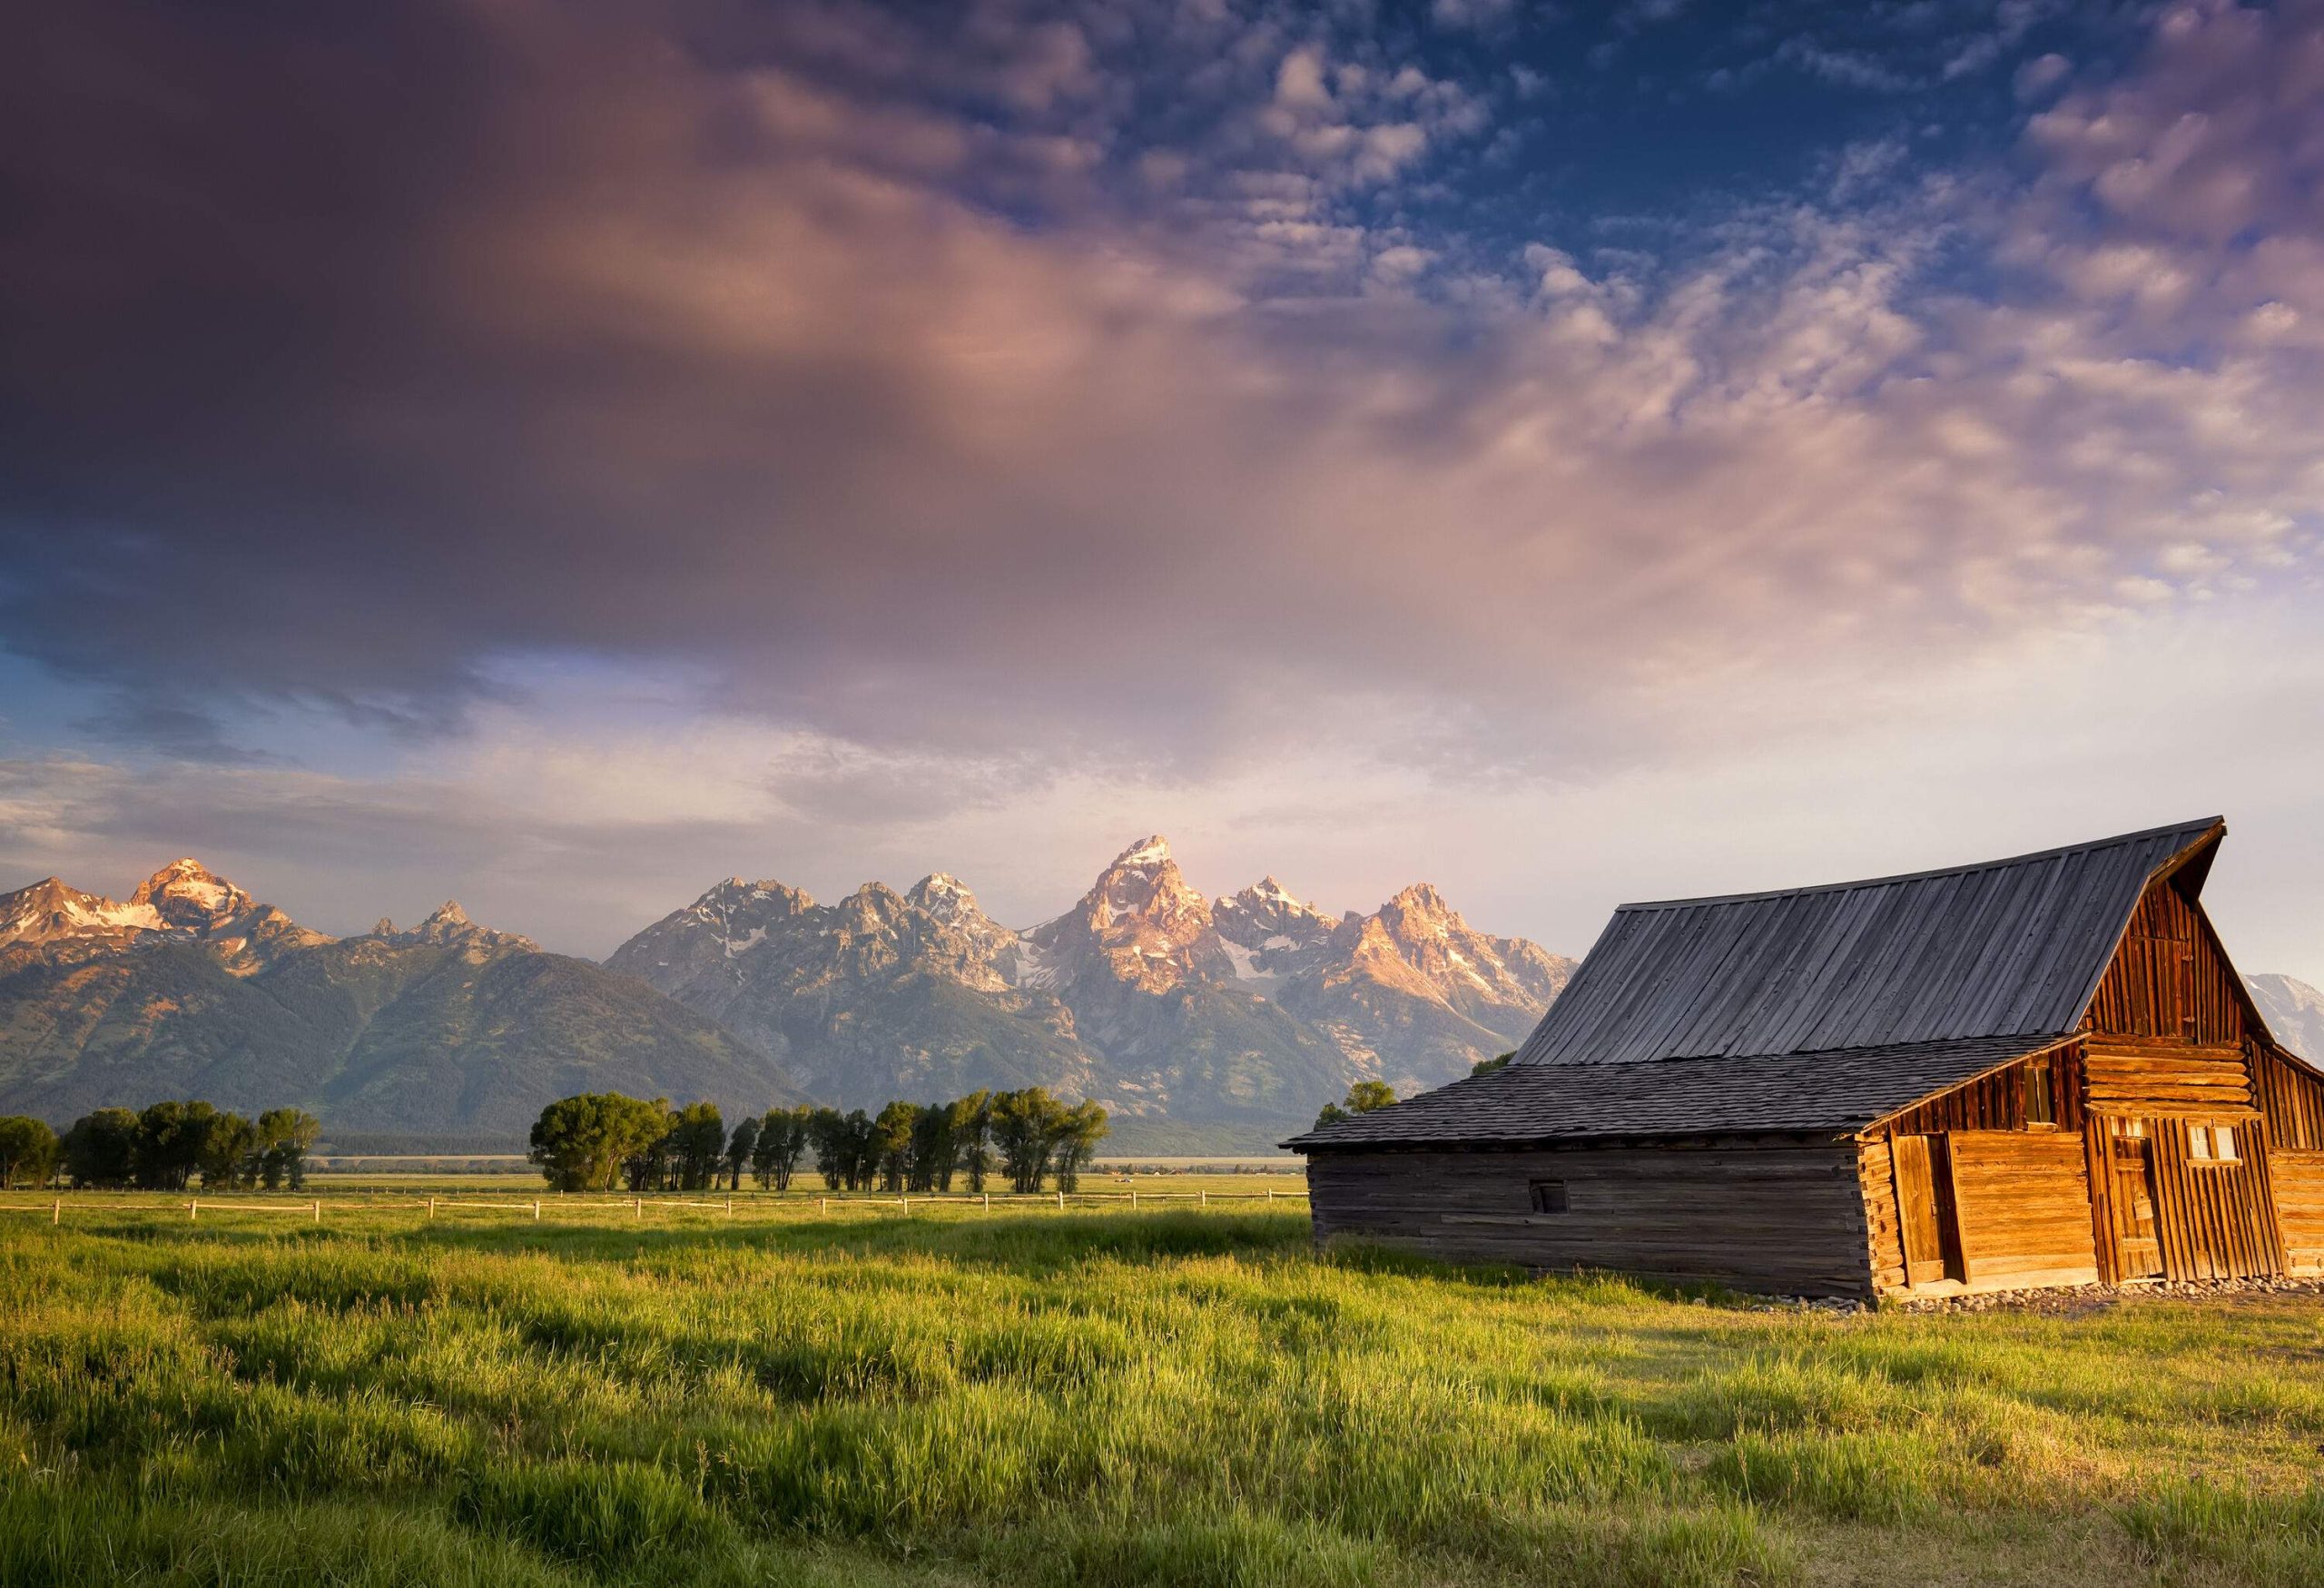 An old wooden barn in the lush ranchland bounded by a sharp-pointed, snow-capped mountain range.